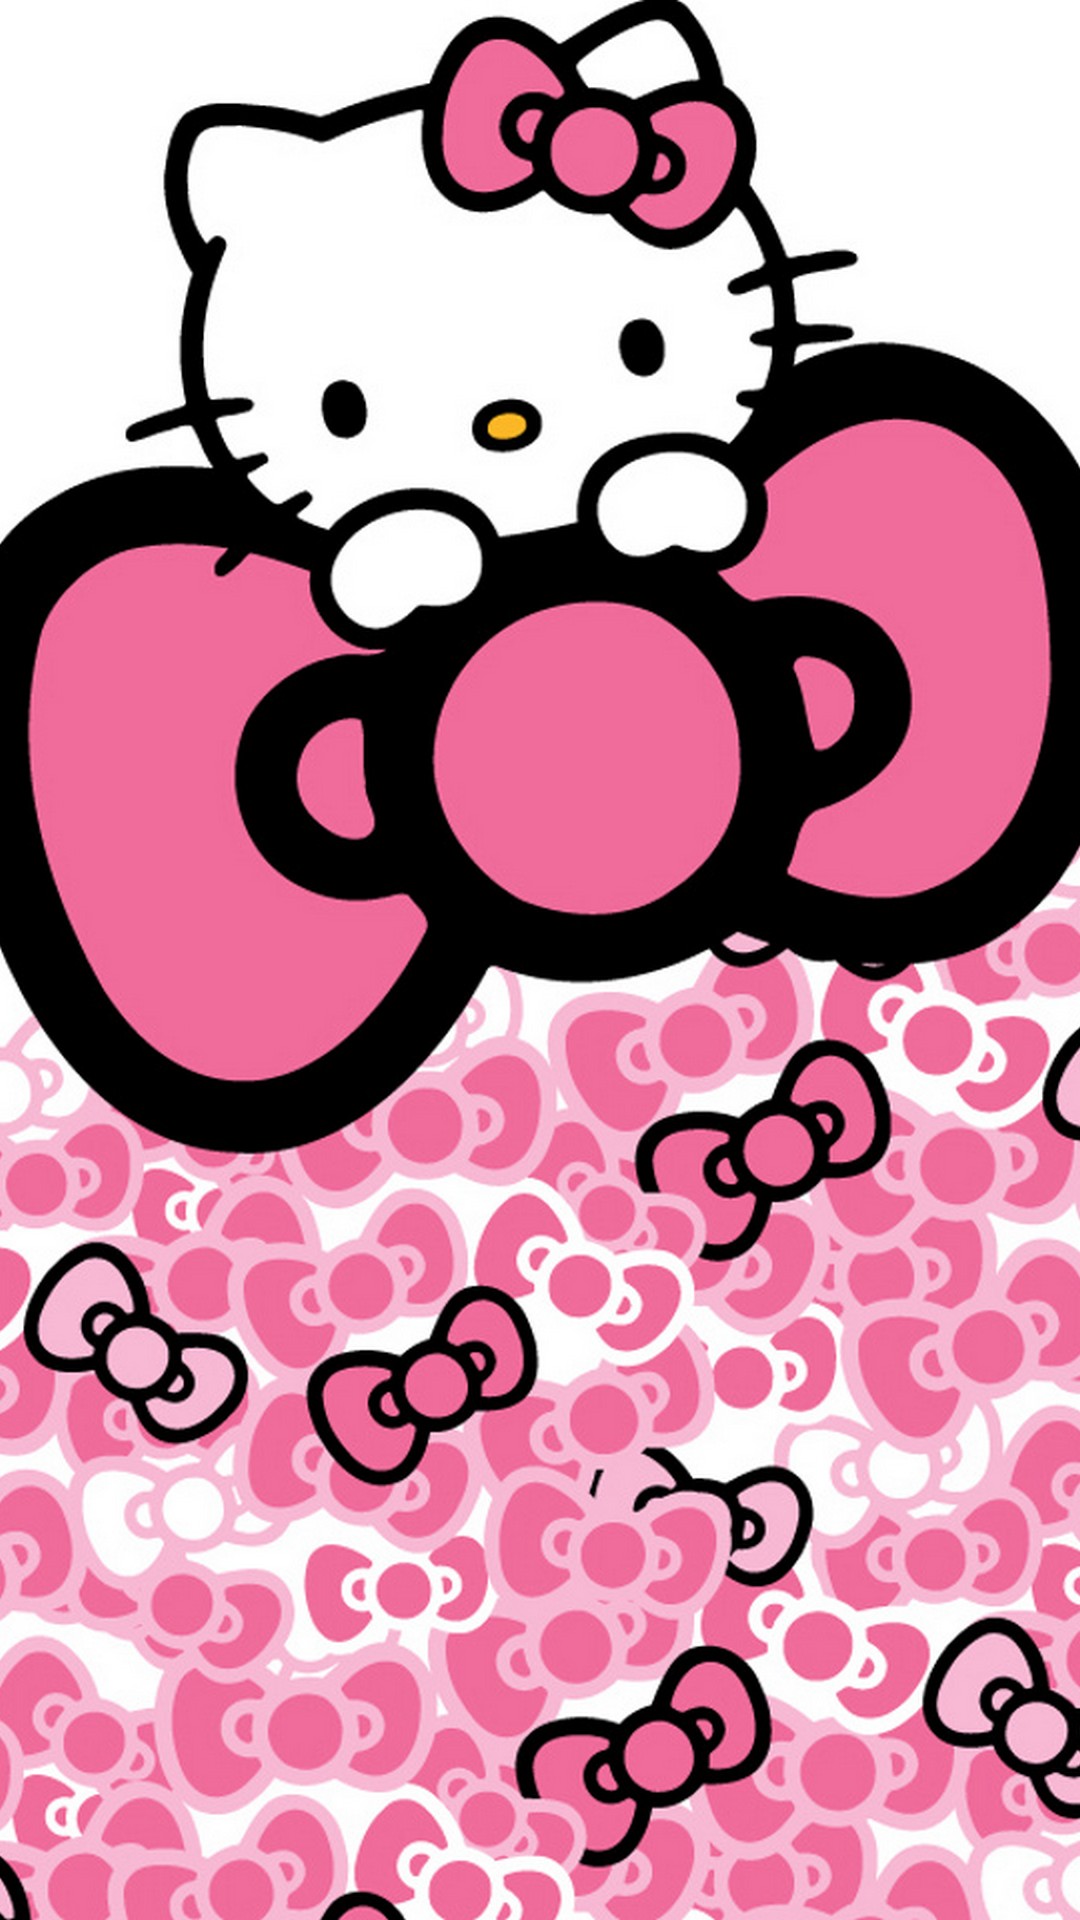 Hello Kitty Pictures Wallpaper For Android with resolution 1080X1920 pixel. You can make this wallpaper for your Android backgrounds, Tablet, Smartphones Screensavers and Mobile Phone Lock Screen